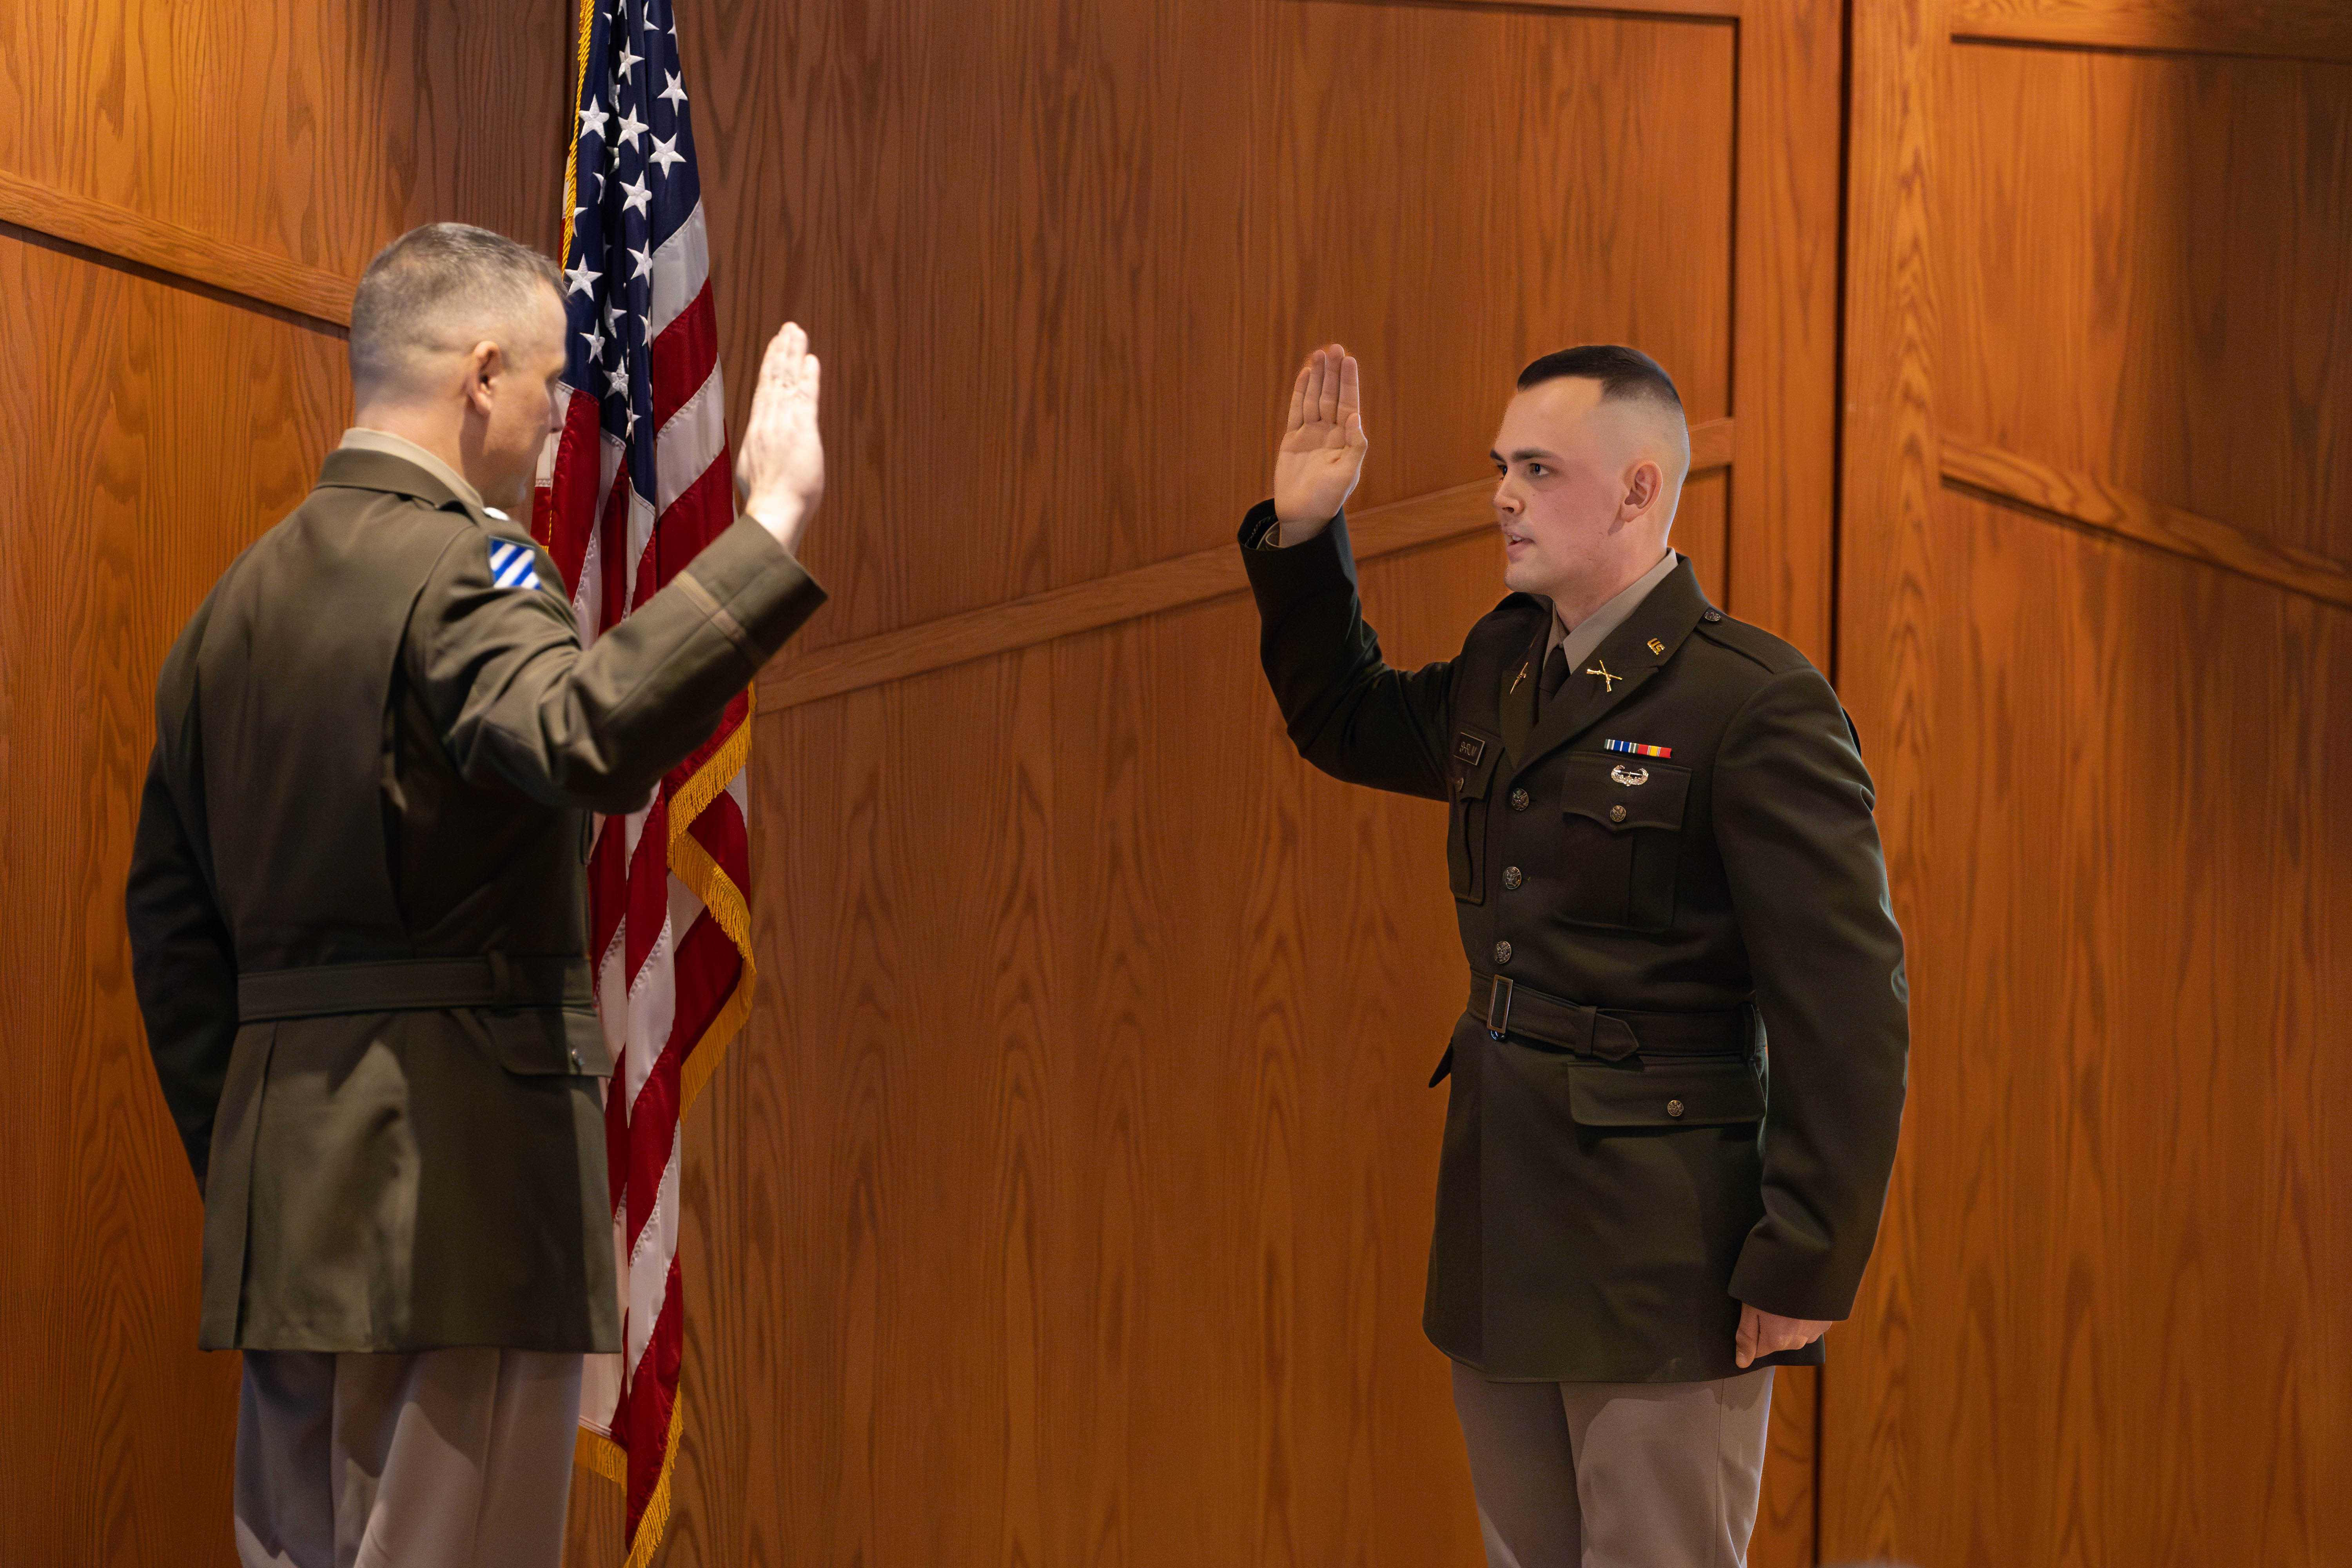 Ltc. Lucas giving the Oath of Commissioned Officer to 2nd Lt. Shrum